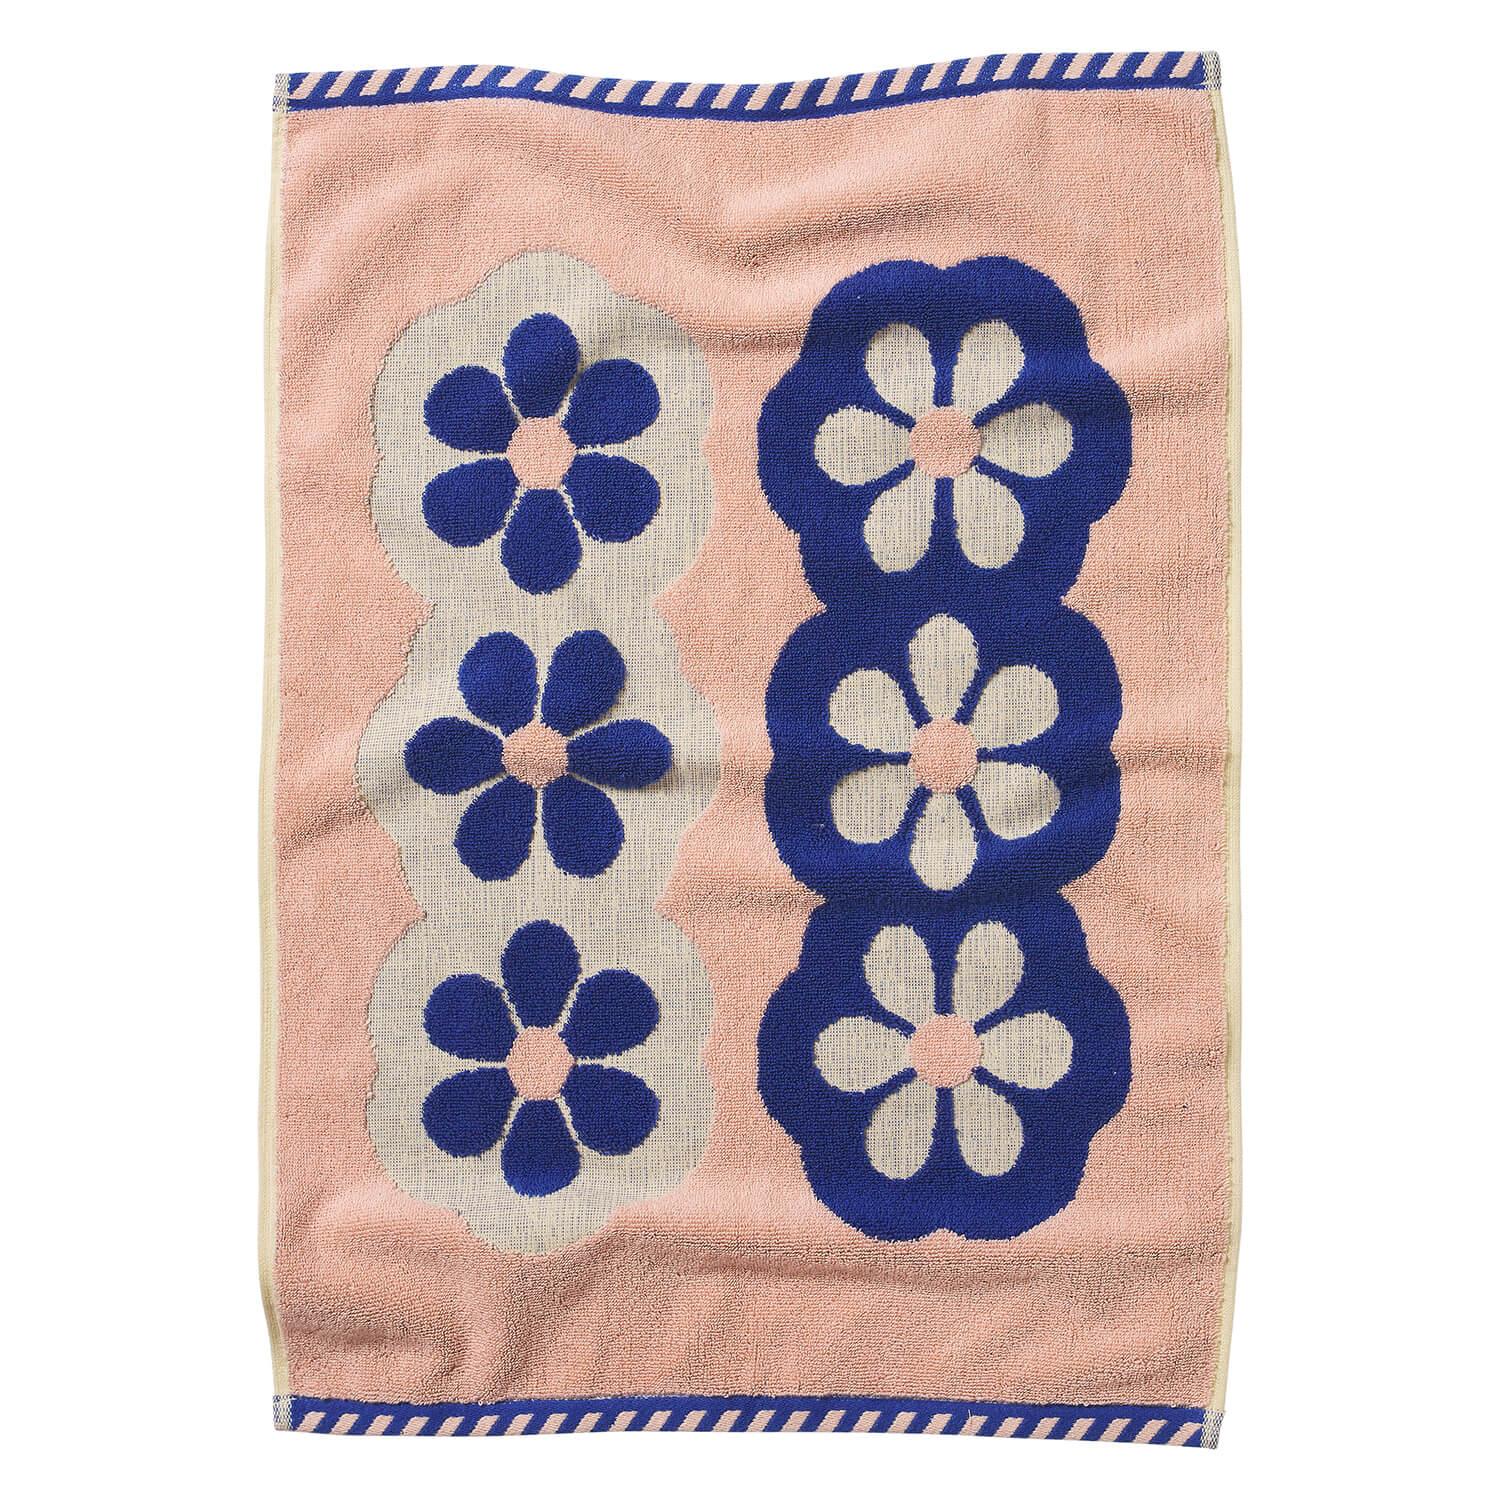 Sage and clare |Winifred Daisy Hand Towel Peach |The Home Maven